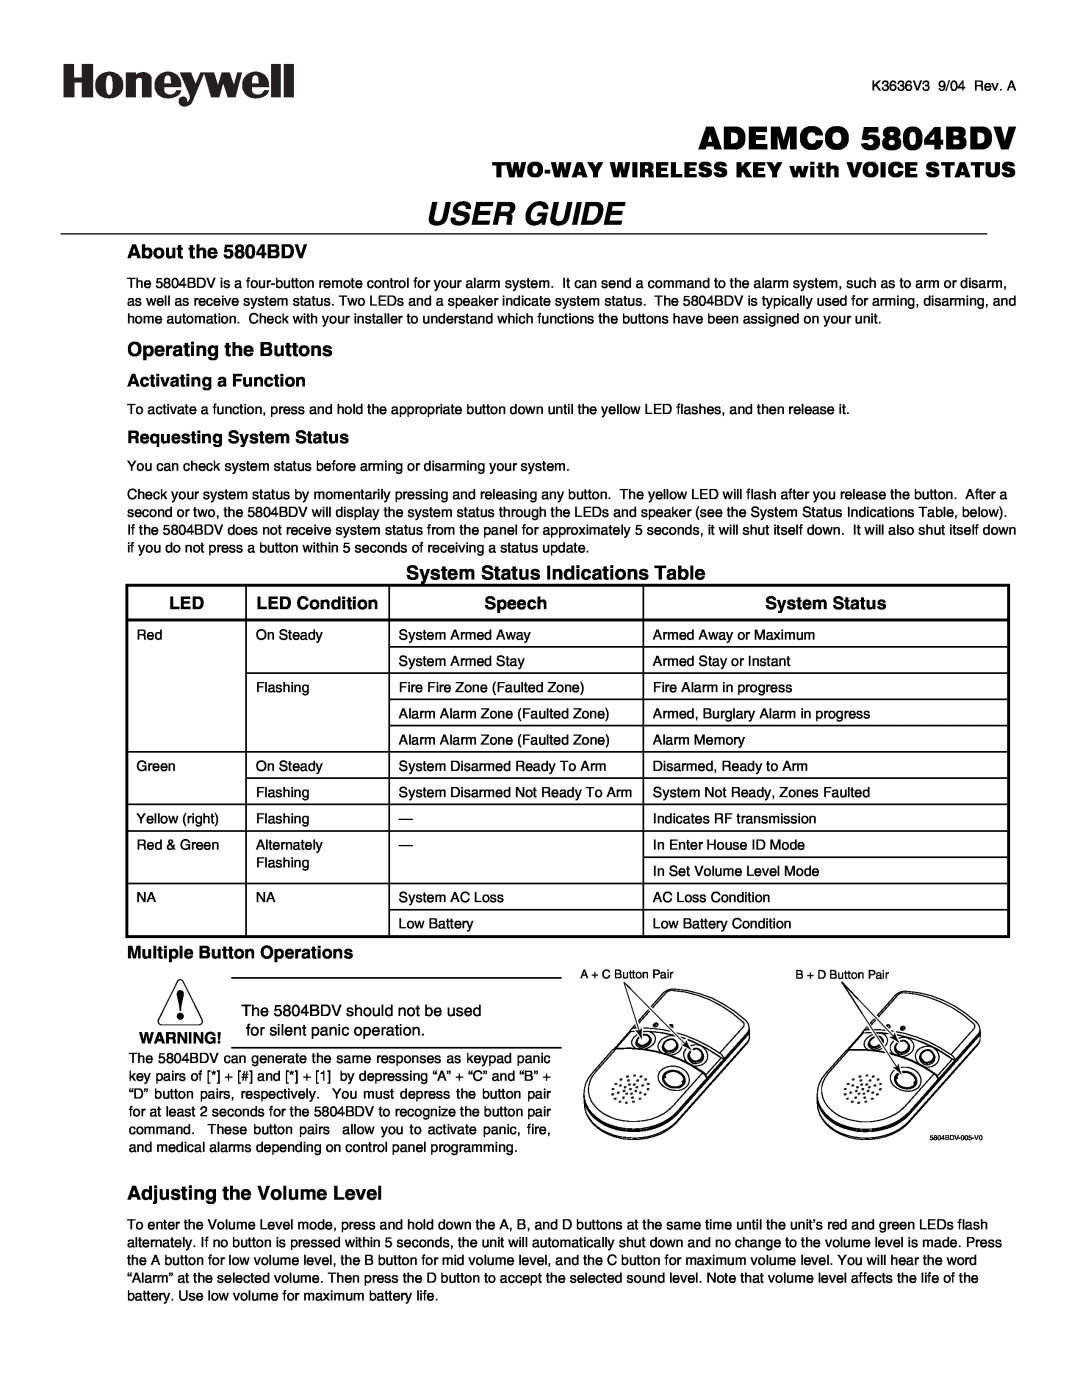 Honeywell manual About the 5804BDV, Operating the Buttons, System Status Indications Table, Adjusting the Volume Level 